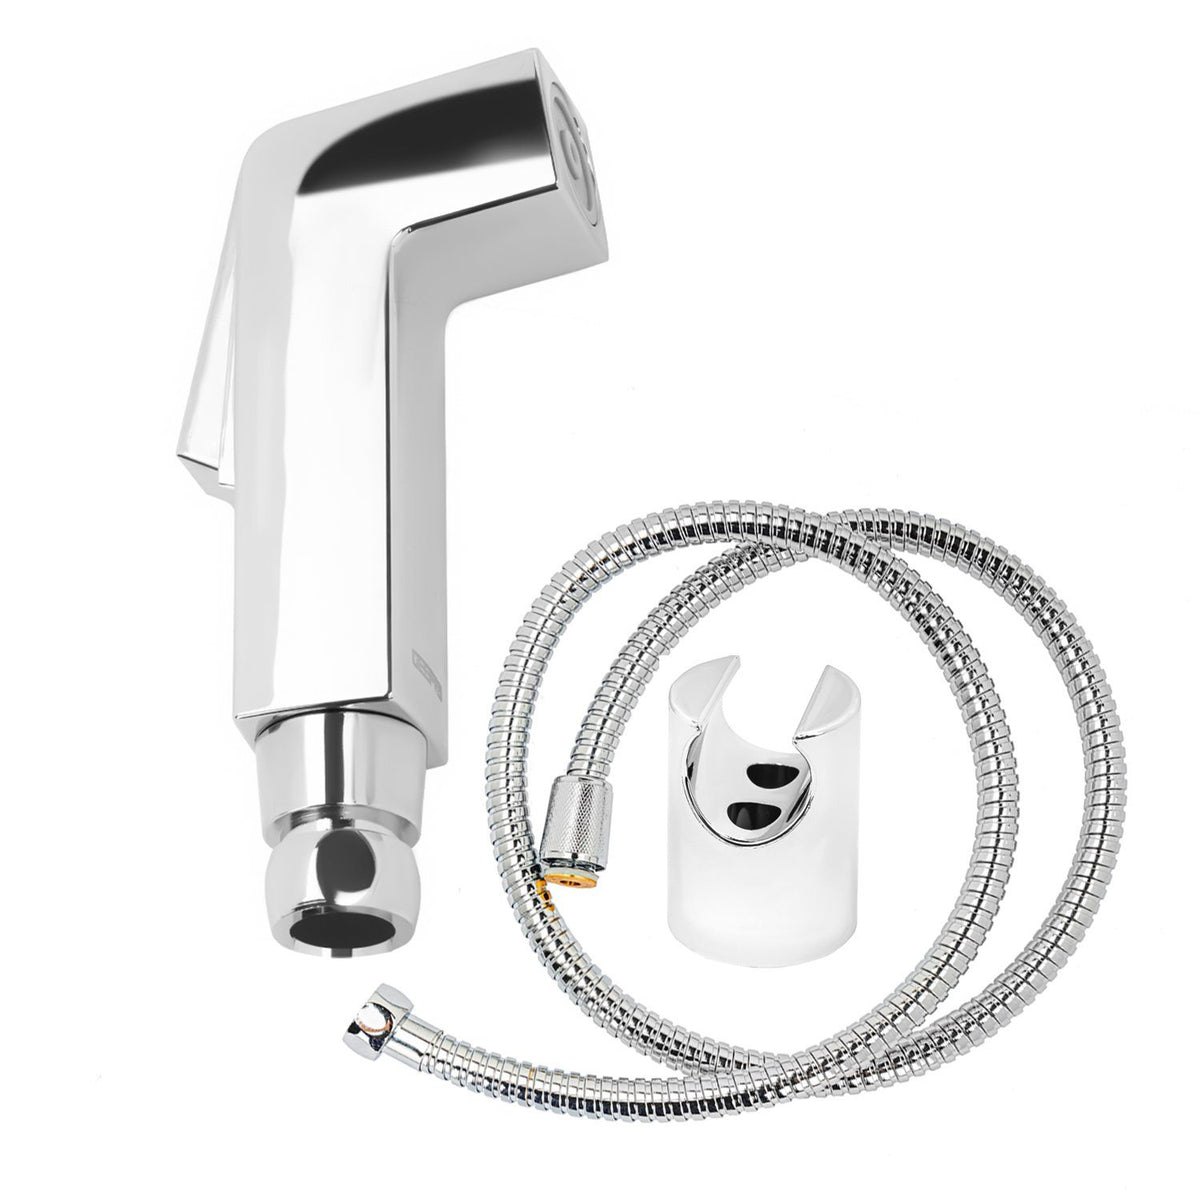 Stainless steel polished portable toilet bidet sprayer/bidet/shattaf/douche. Besides it you have the hose that connects the shattaf and a water source along with a handle for the bidet.